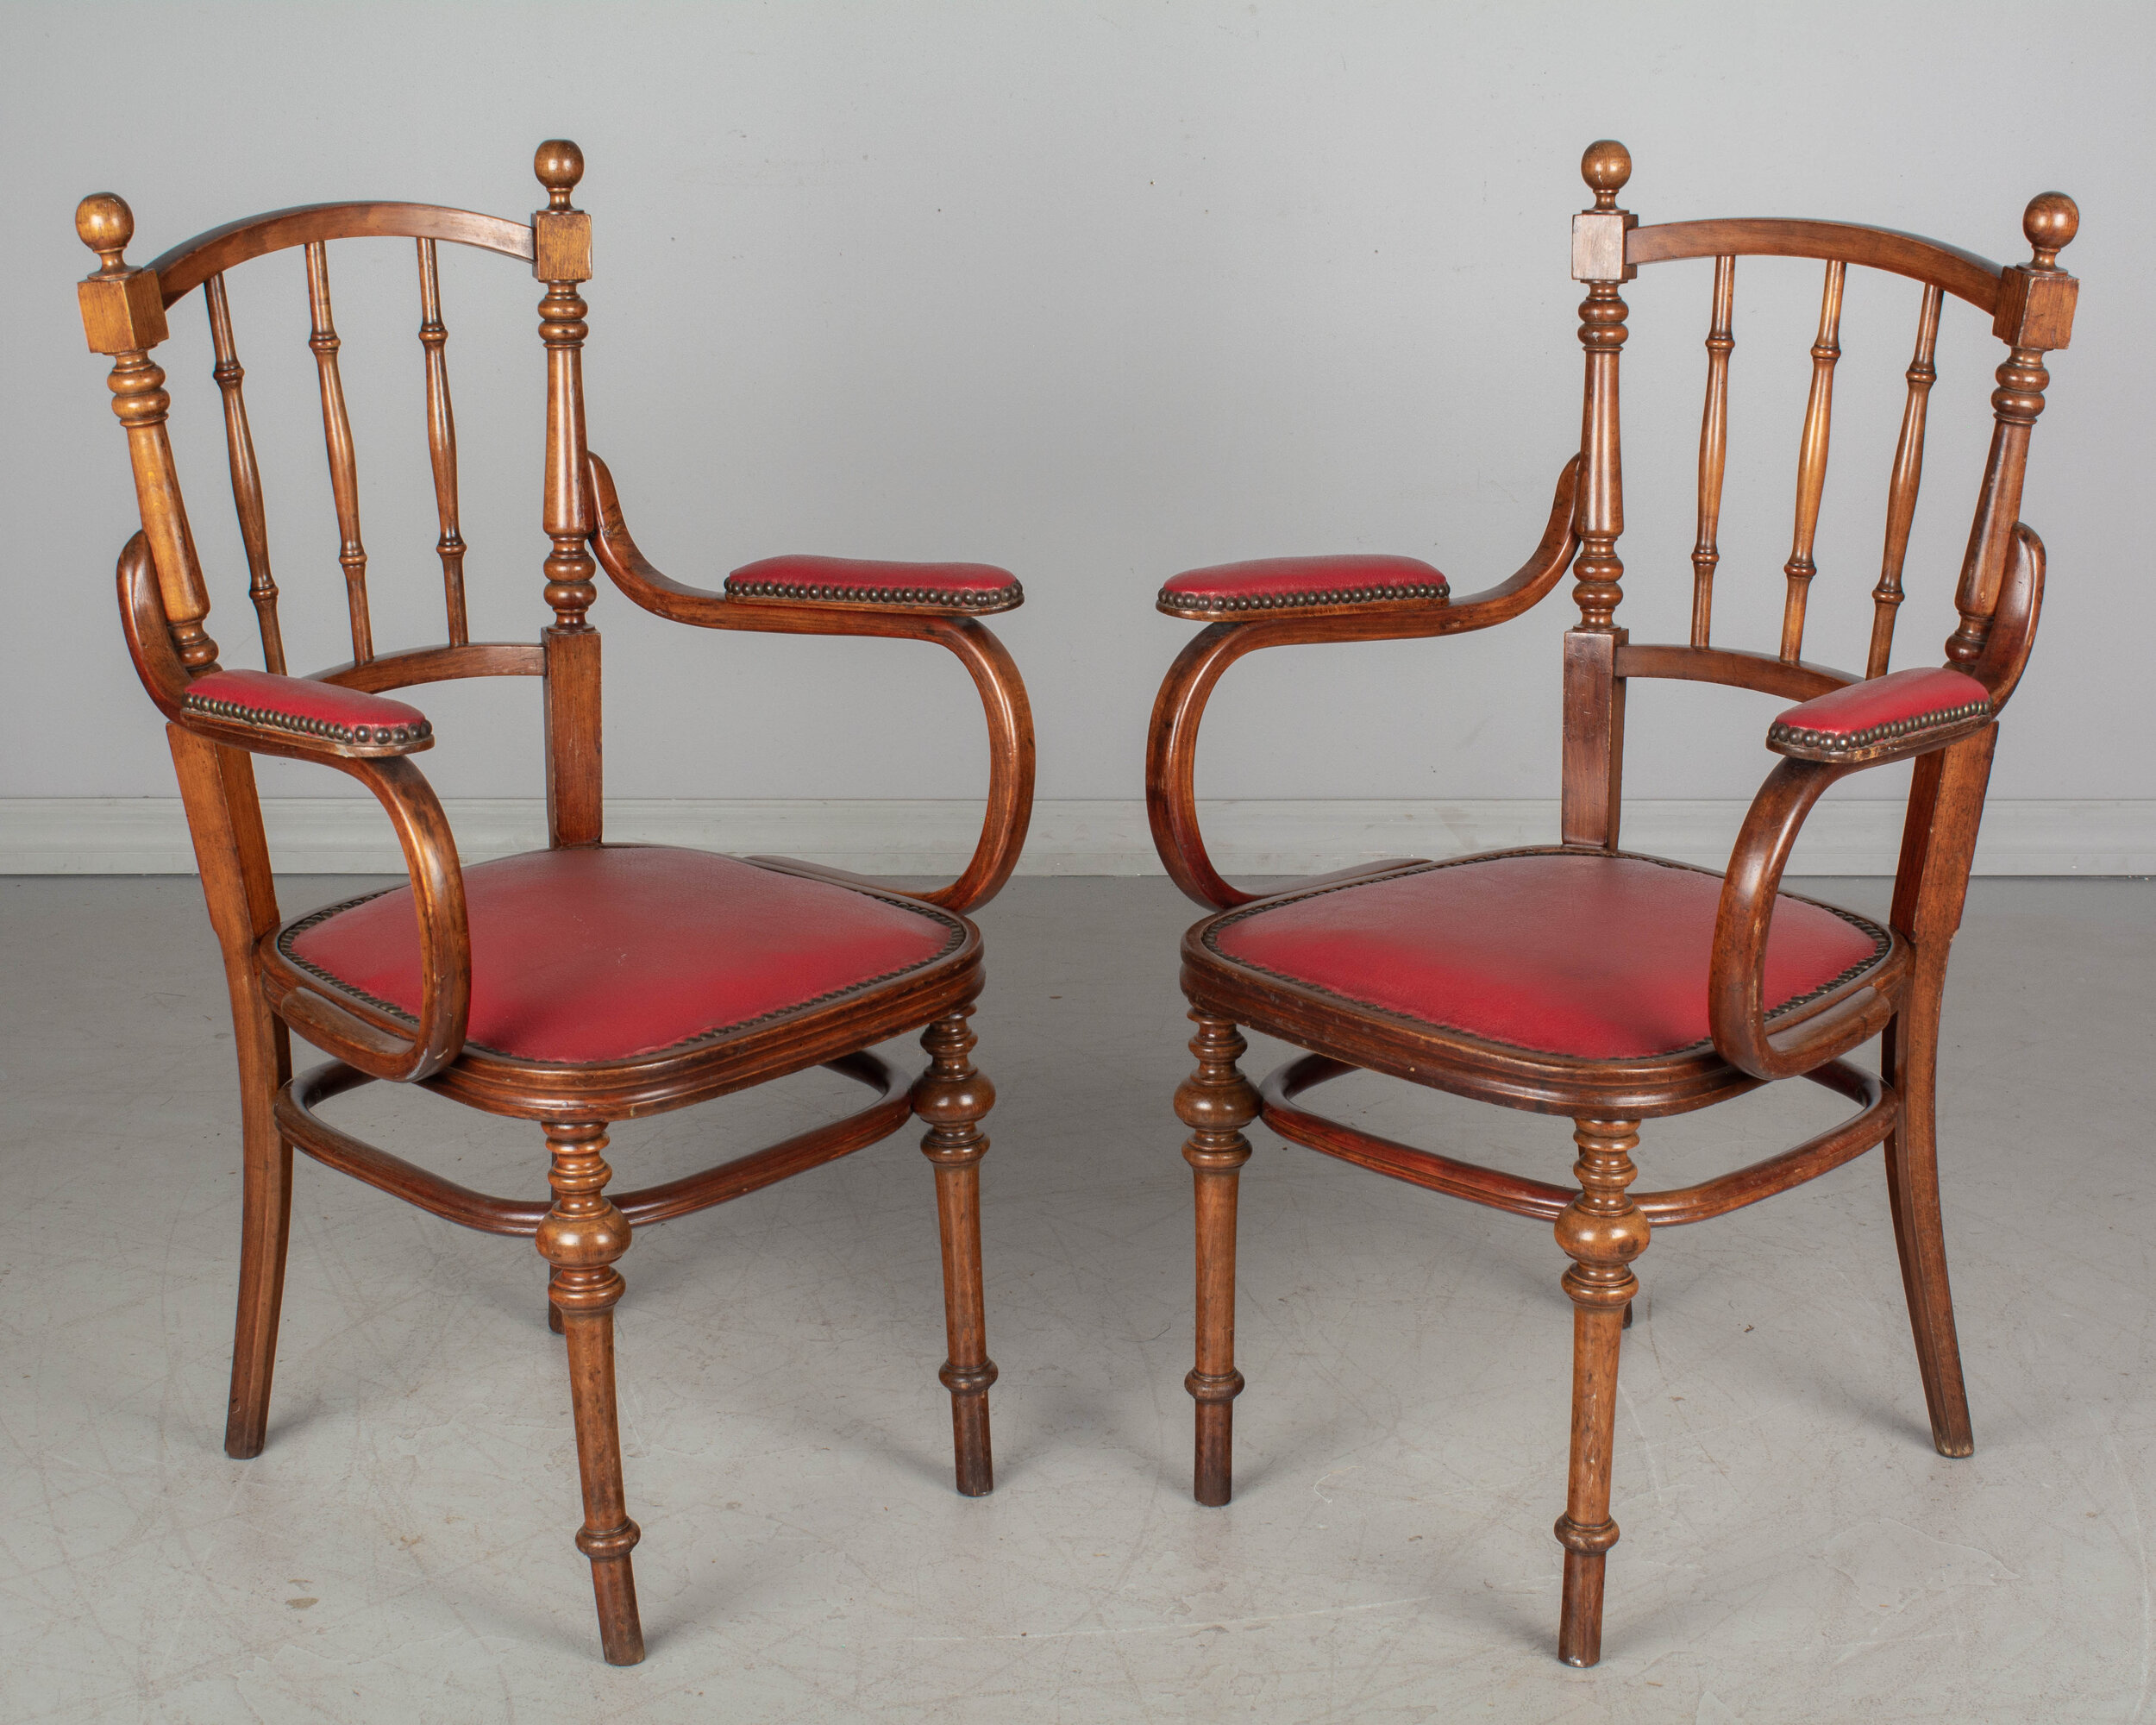 Olivier Fleury French Antiques-Antique Chairs Online | Buy Antique Chairs  Online